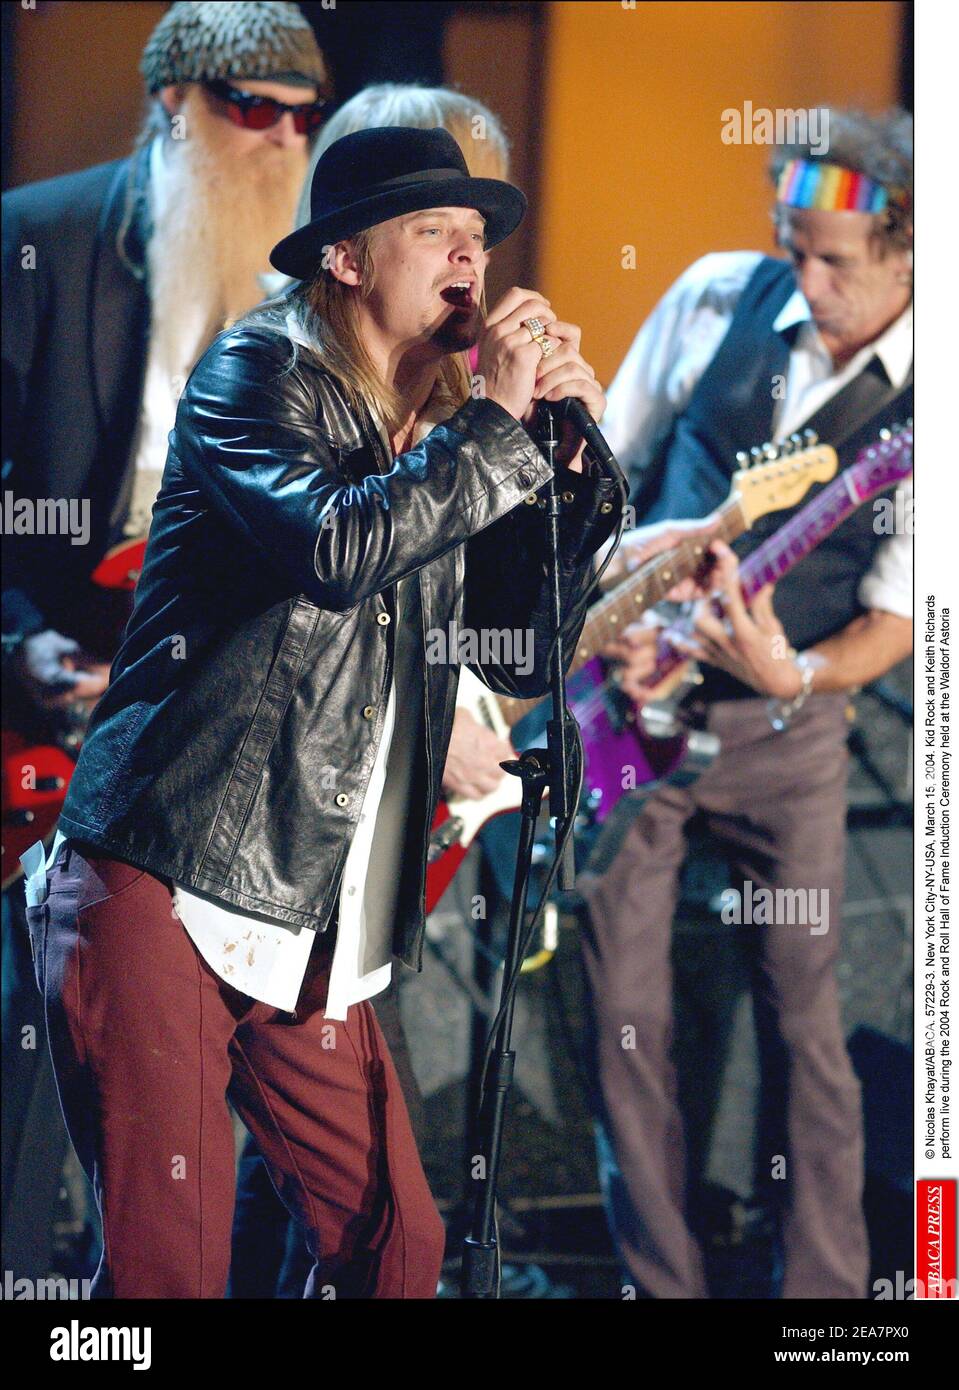 Kid Rock and Keith Richards perform live during the 2004 Rock and Roll Hall of Fame Induction Ceremony held at the Waldorf Astoria in New York, on Monday, March 15, 2004. (Pictured : Kid Rock, Keith Richards). Photo by Nicolas Khayat/ABACA. Stock Photo